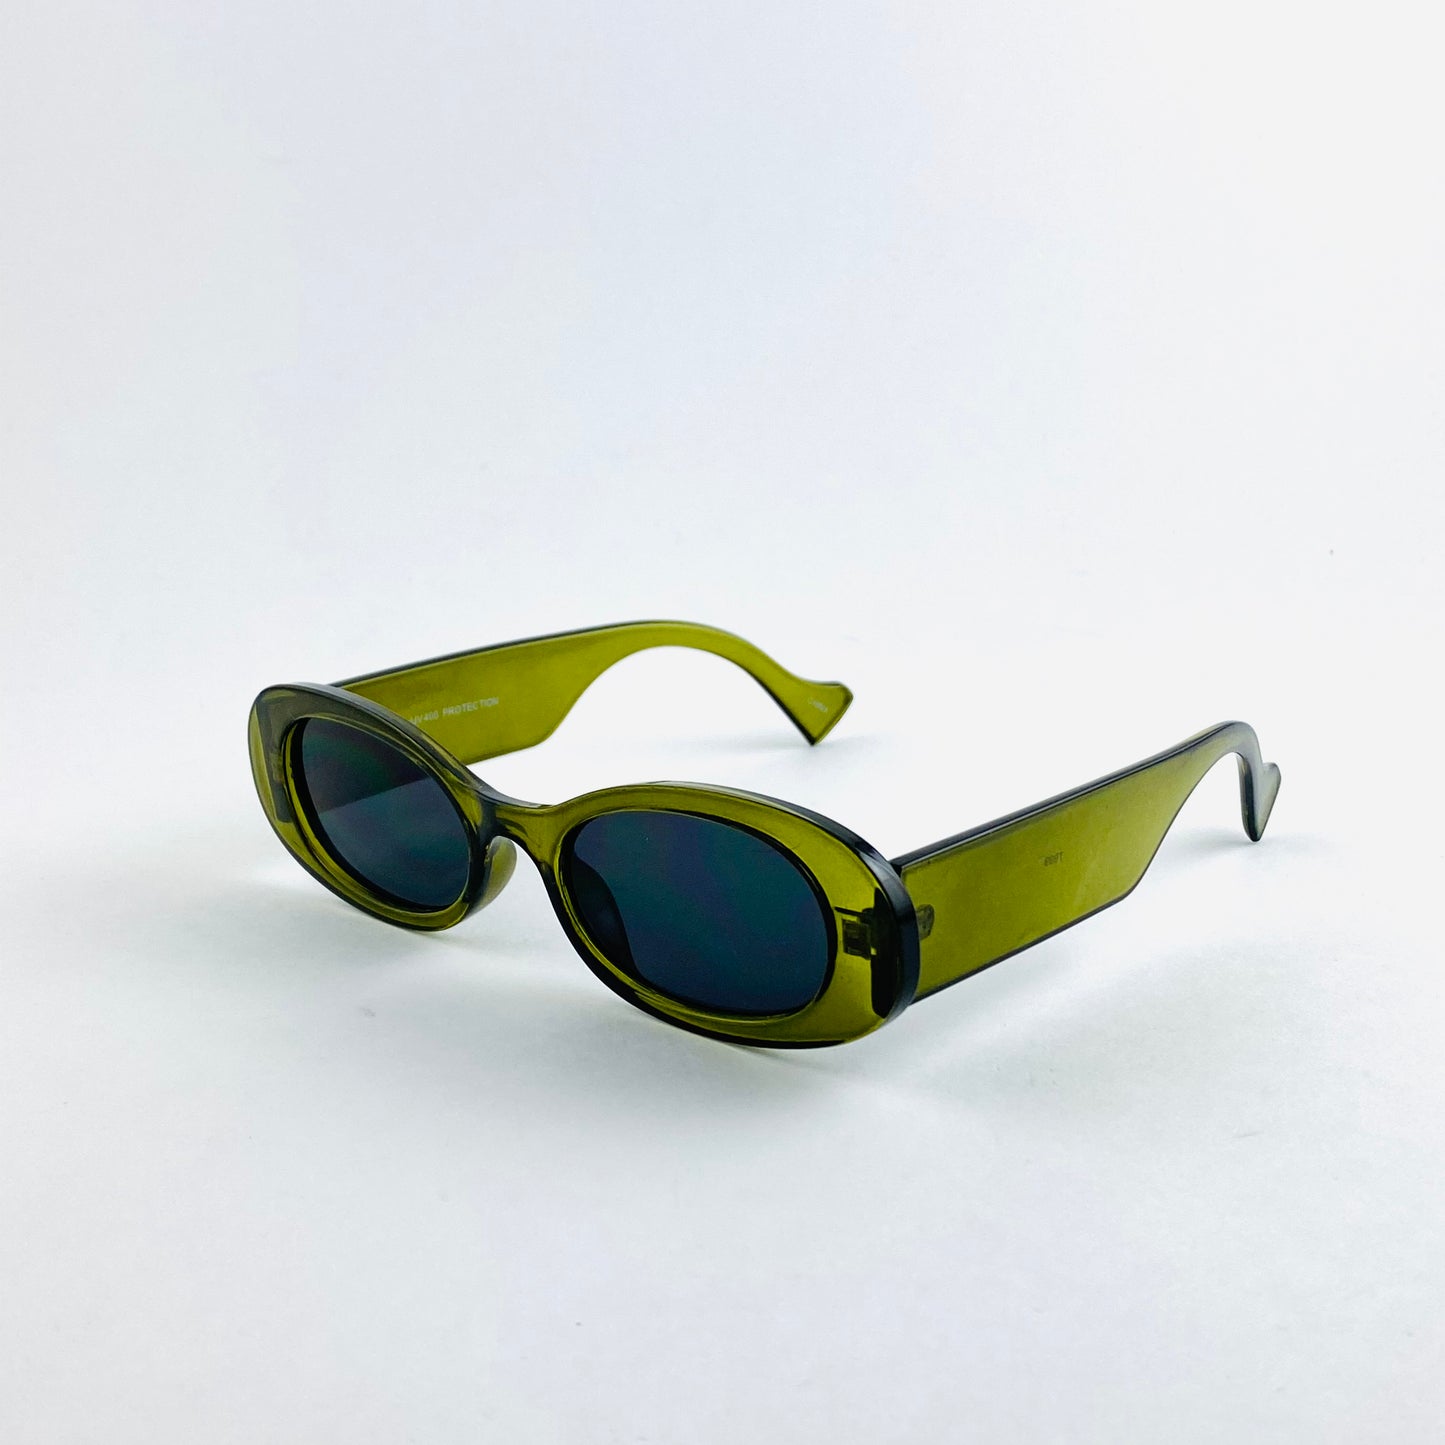 Modern y2k style sunglasses with dark lens, retro aesthetic and thick frames
